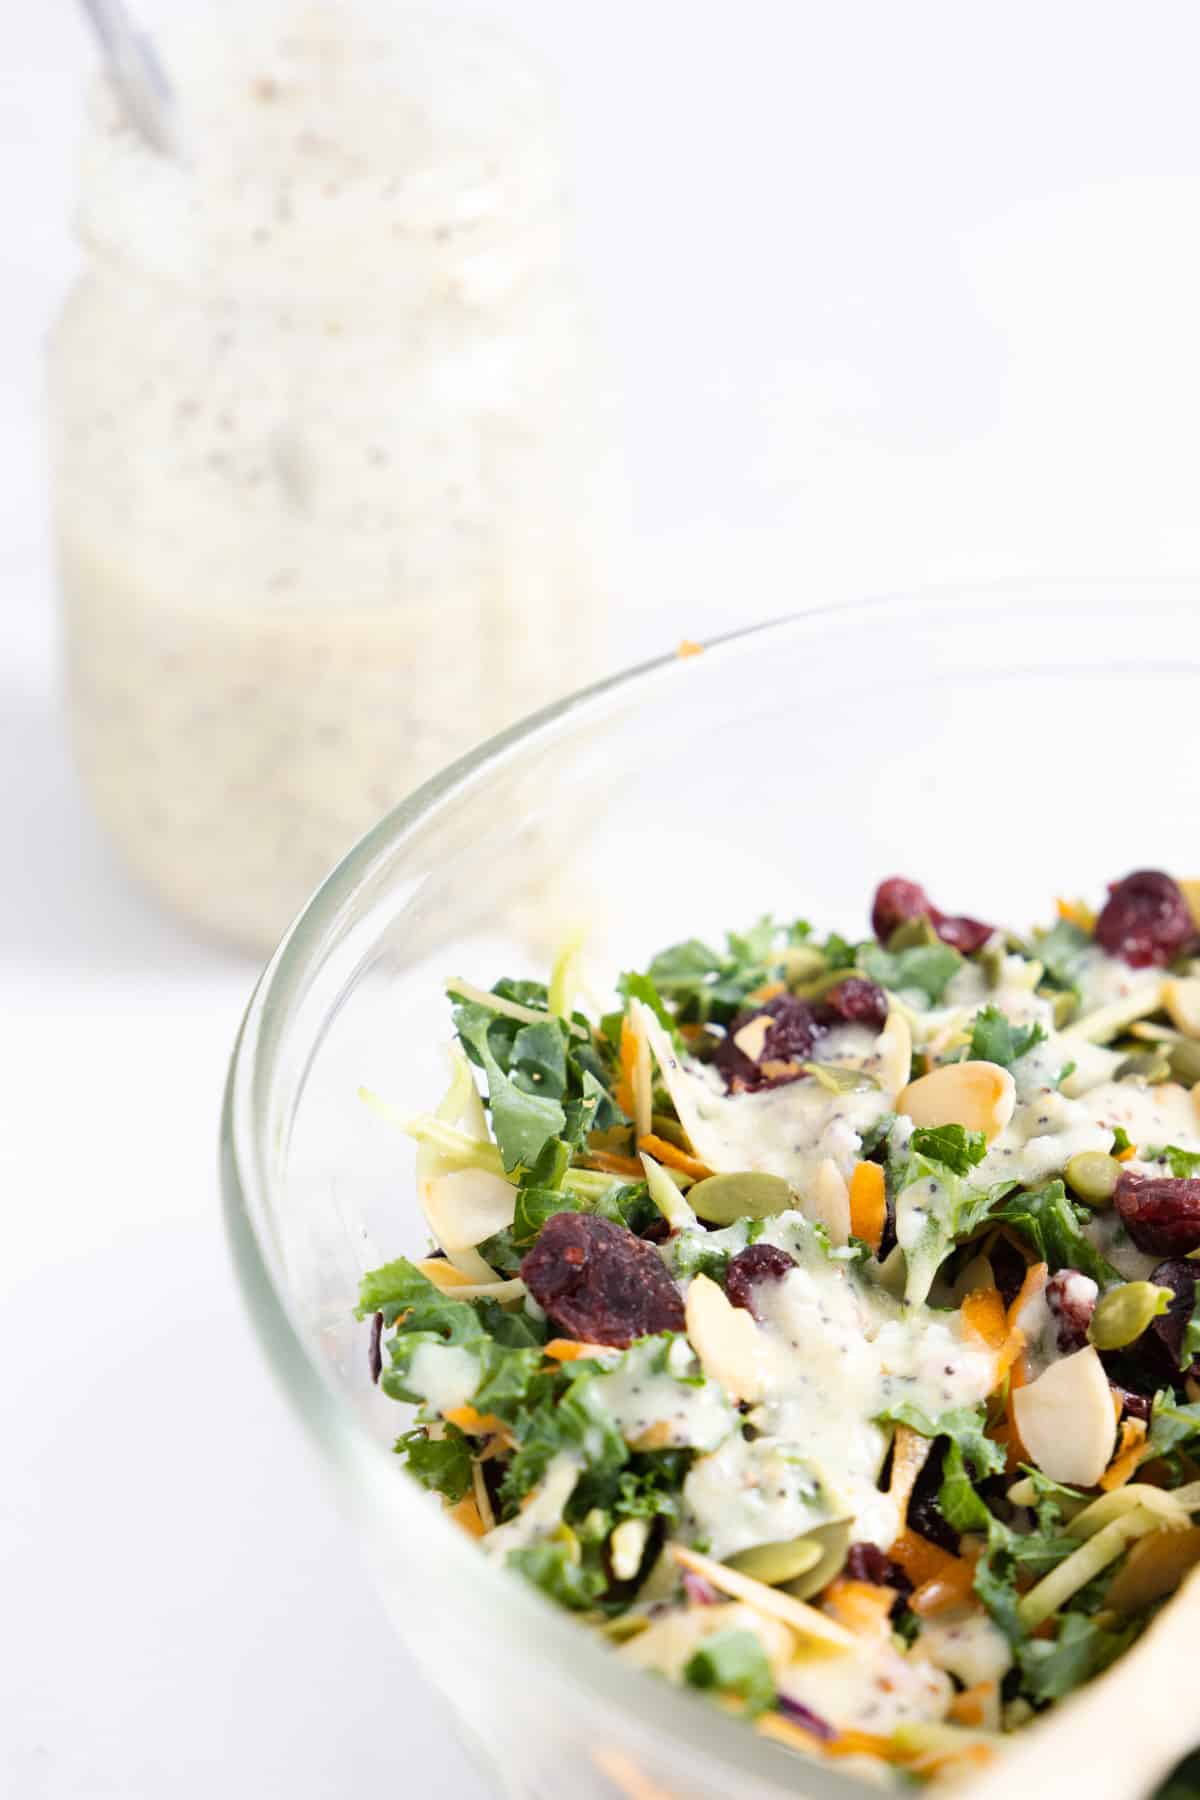 Partial view of a transparent bowl with kale salad in it and in the background a jar with a white creamy dressing. 